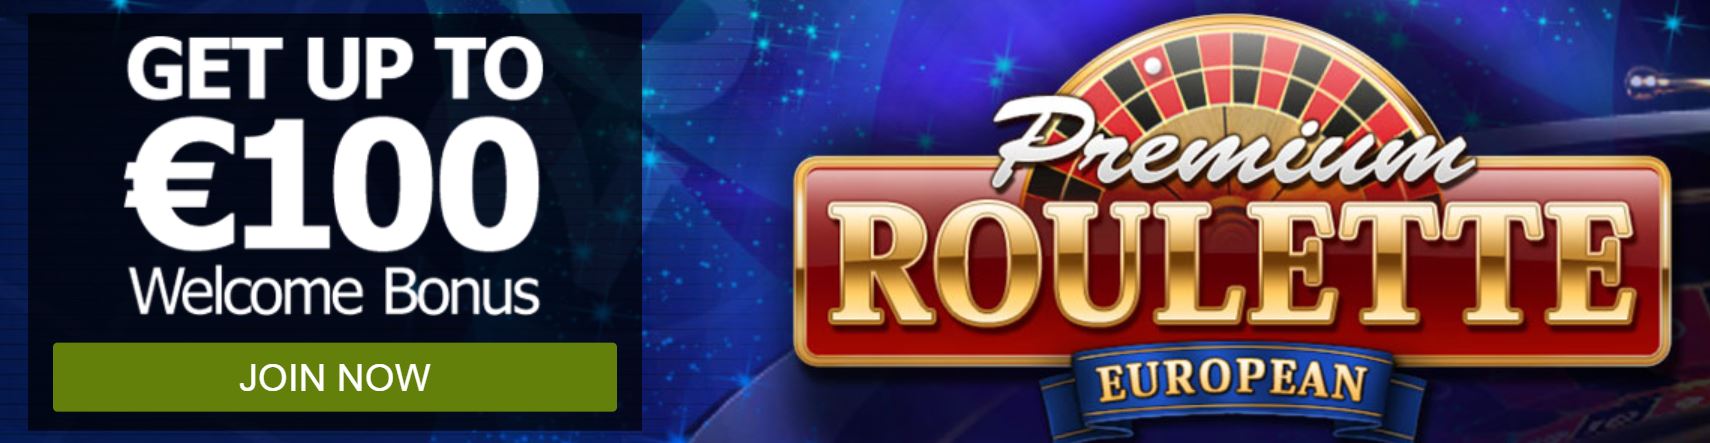 European roulette is one of the most played games on titanbet.